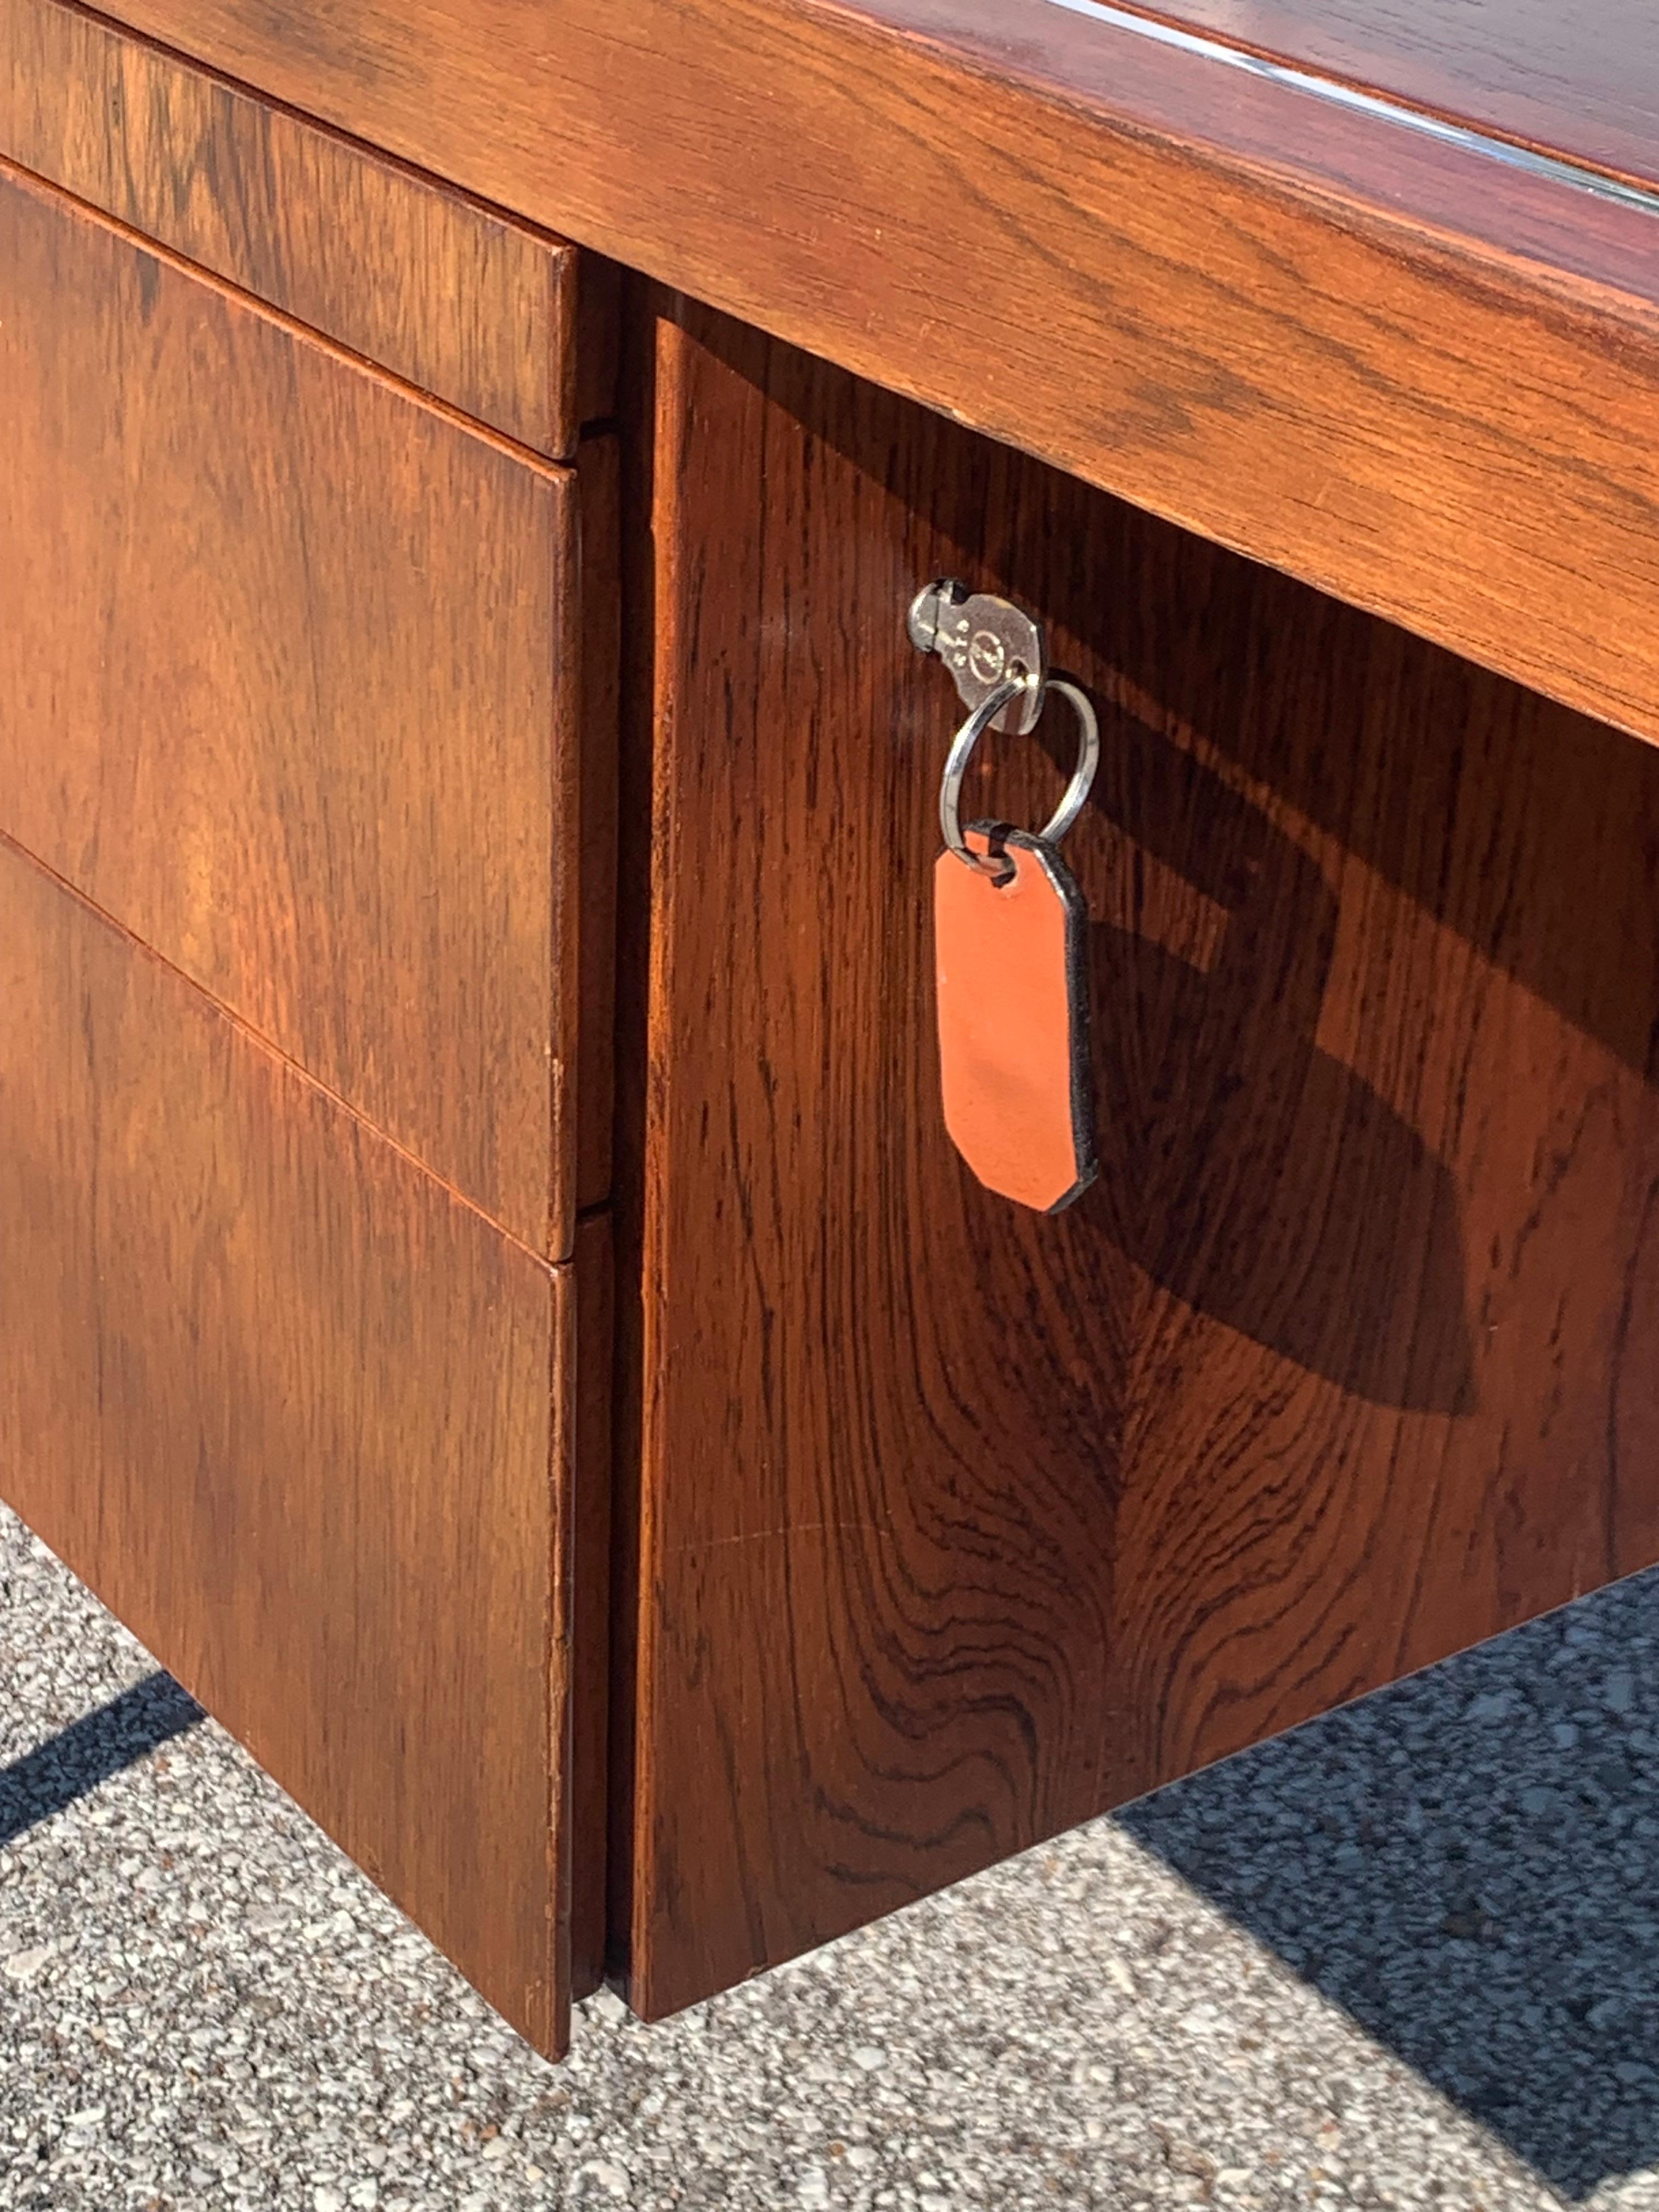 Richard Schultz for Knoll 1960s Mid-Century Modern Rosewood Executive Desk #4146 In Good Condition For Sale In St. Louis, MO